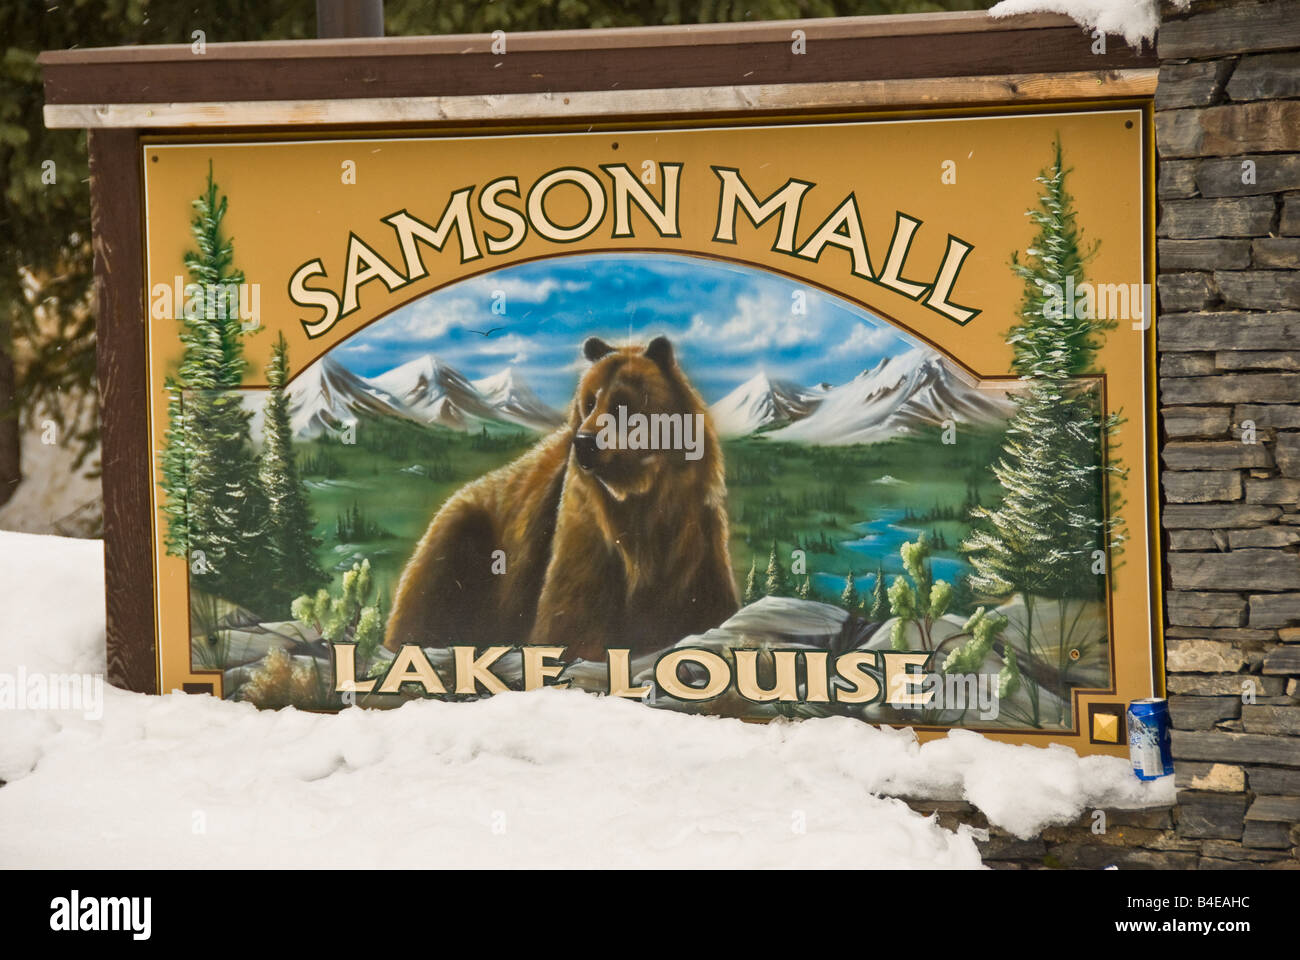 Lake Louise Canada Samson Mall sign half-buried by snow with grizzly bear, canadian shopping mall Stock Photo